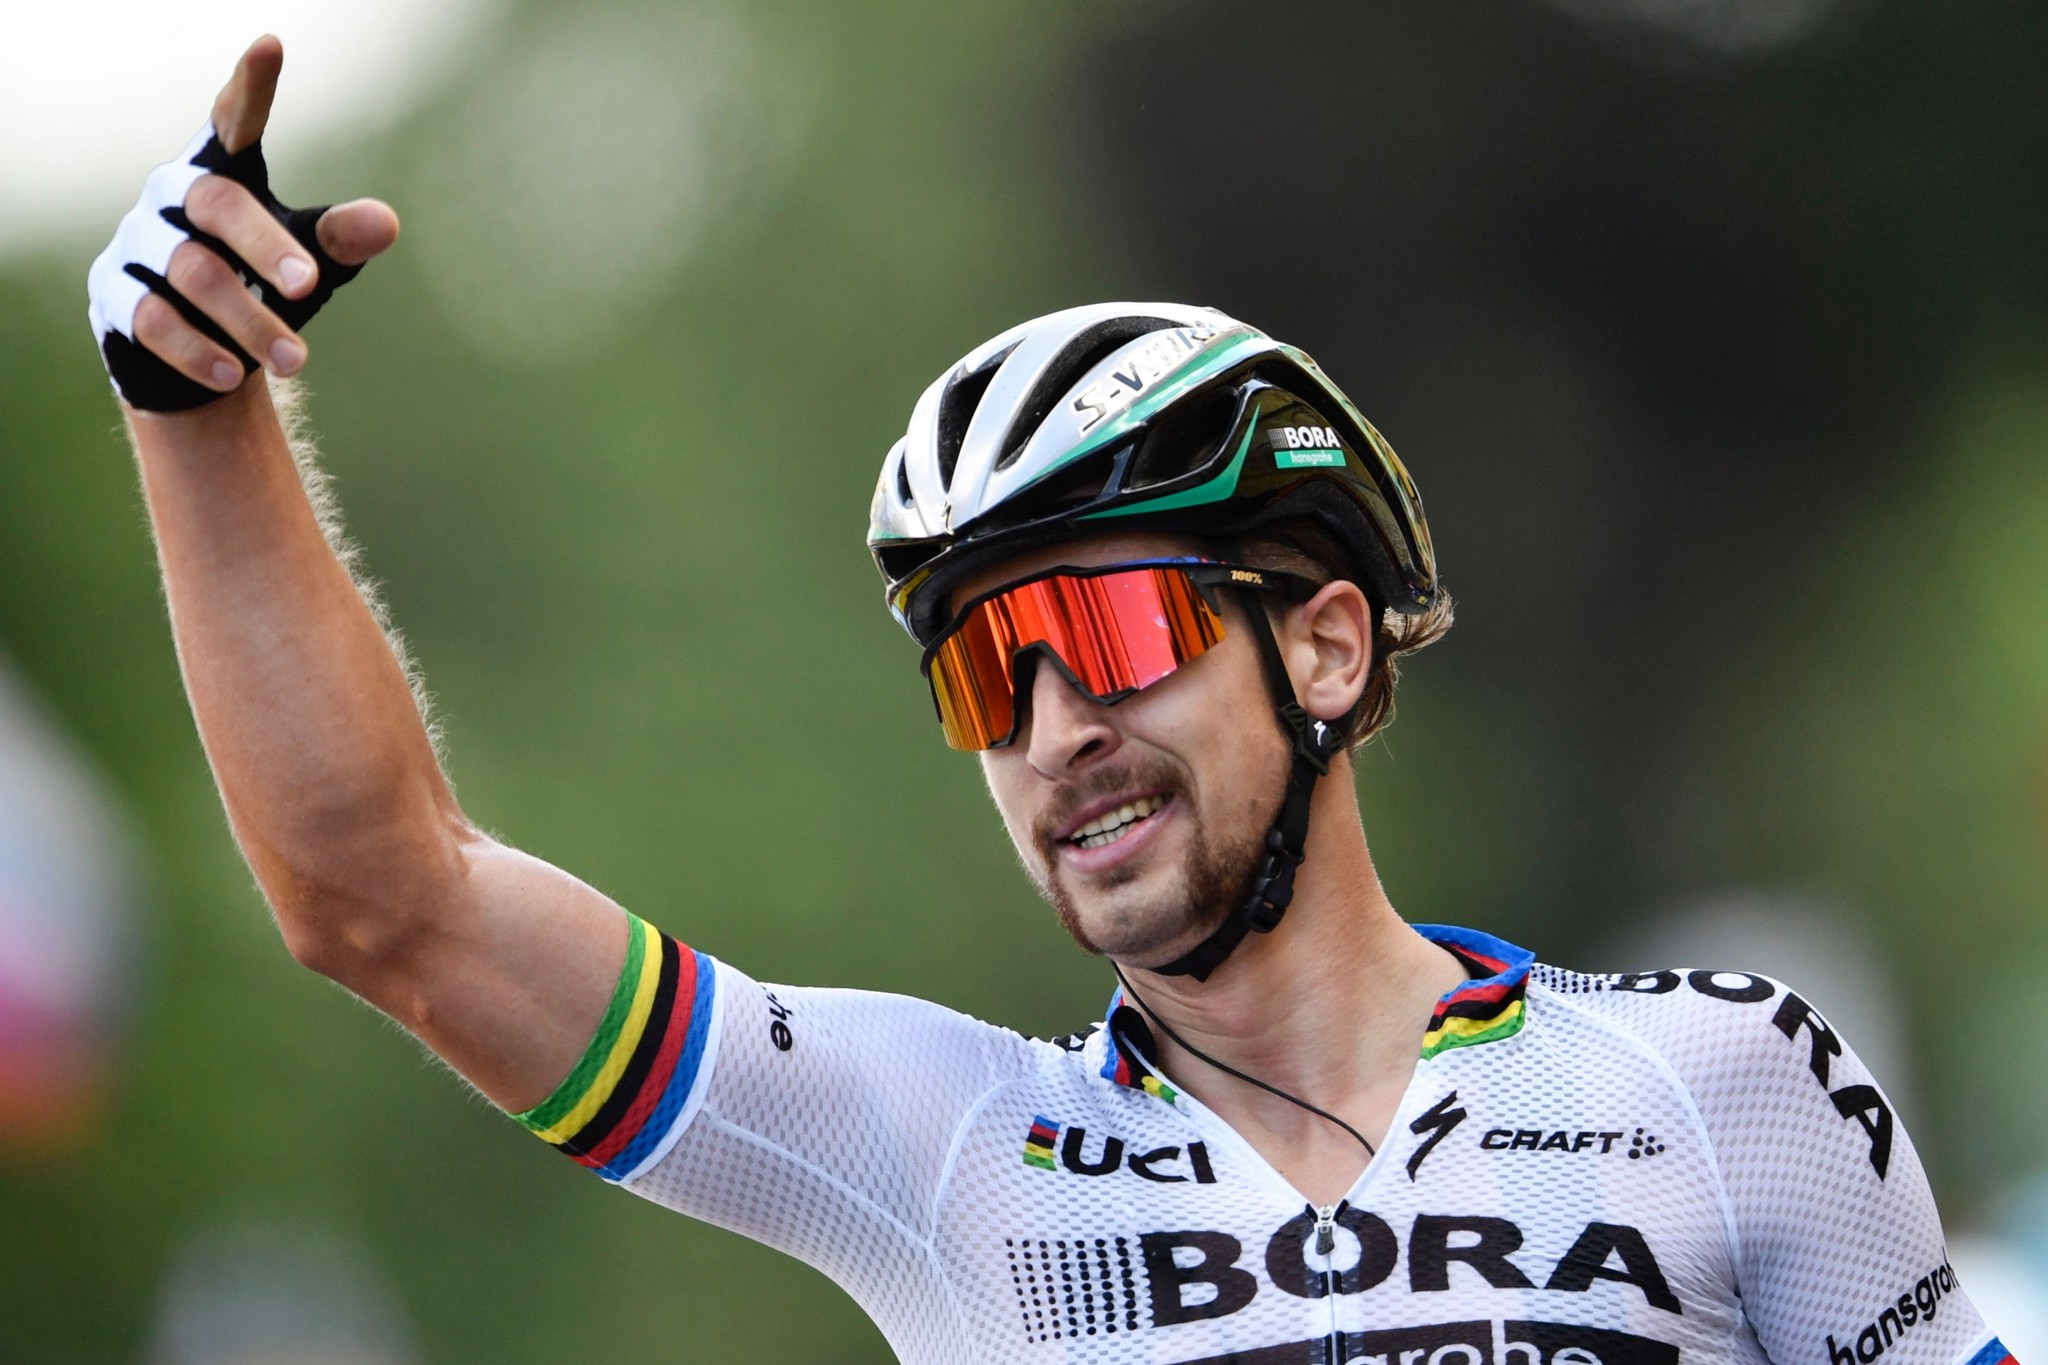 Sagan claims 100th career win with successful defence of Grand Prix Cycliste de Quebec title